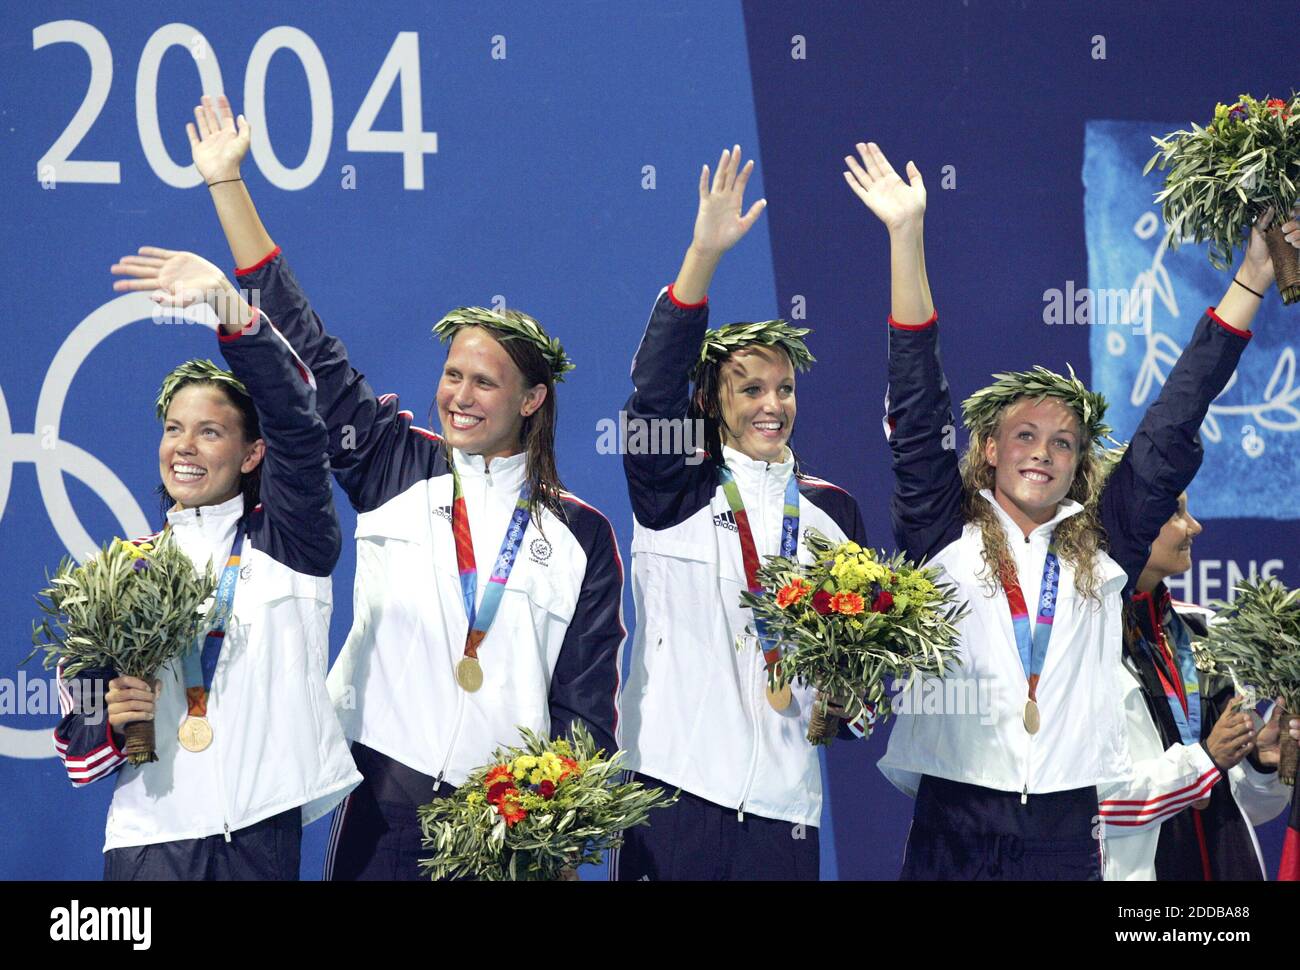 NO FILM, NO VIDEO, NO TV, NO DOCUMENTARY - Members of the U.S. 4x200 freestyle relay team, from left, Natalie Coughlin, Carly Piper, Dana Vollmer and Kaitlin Sandeno, celebrate winning gold at the 2004 Olympic Games on Wednesday, August 18, 2004. Photo by David Eulitt/Kansas City Star/KRT/ABACA. Stock Photo